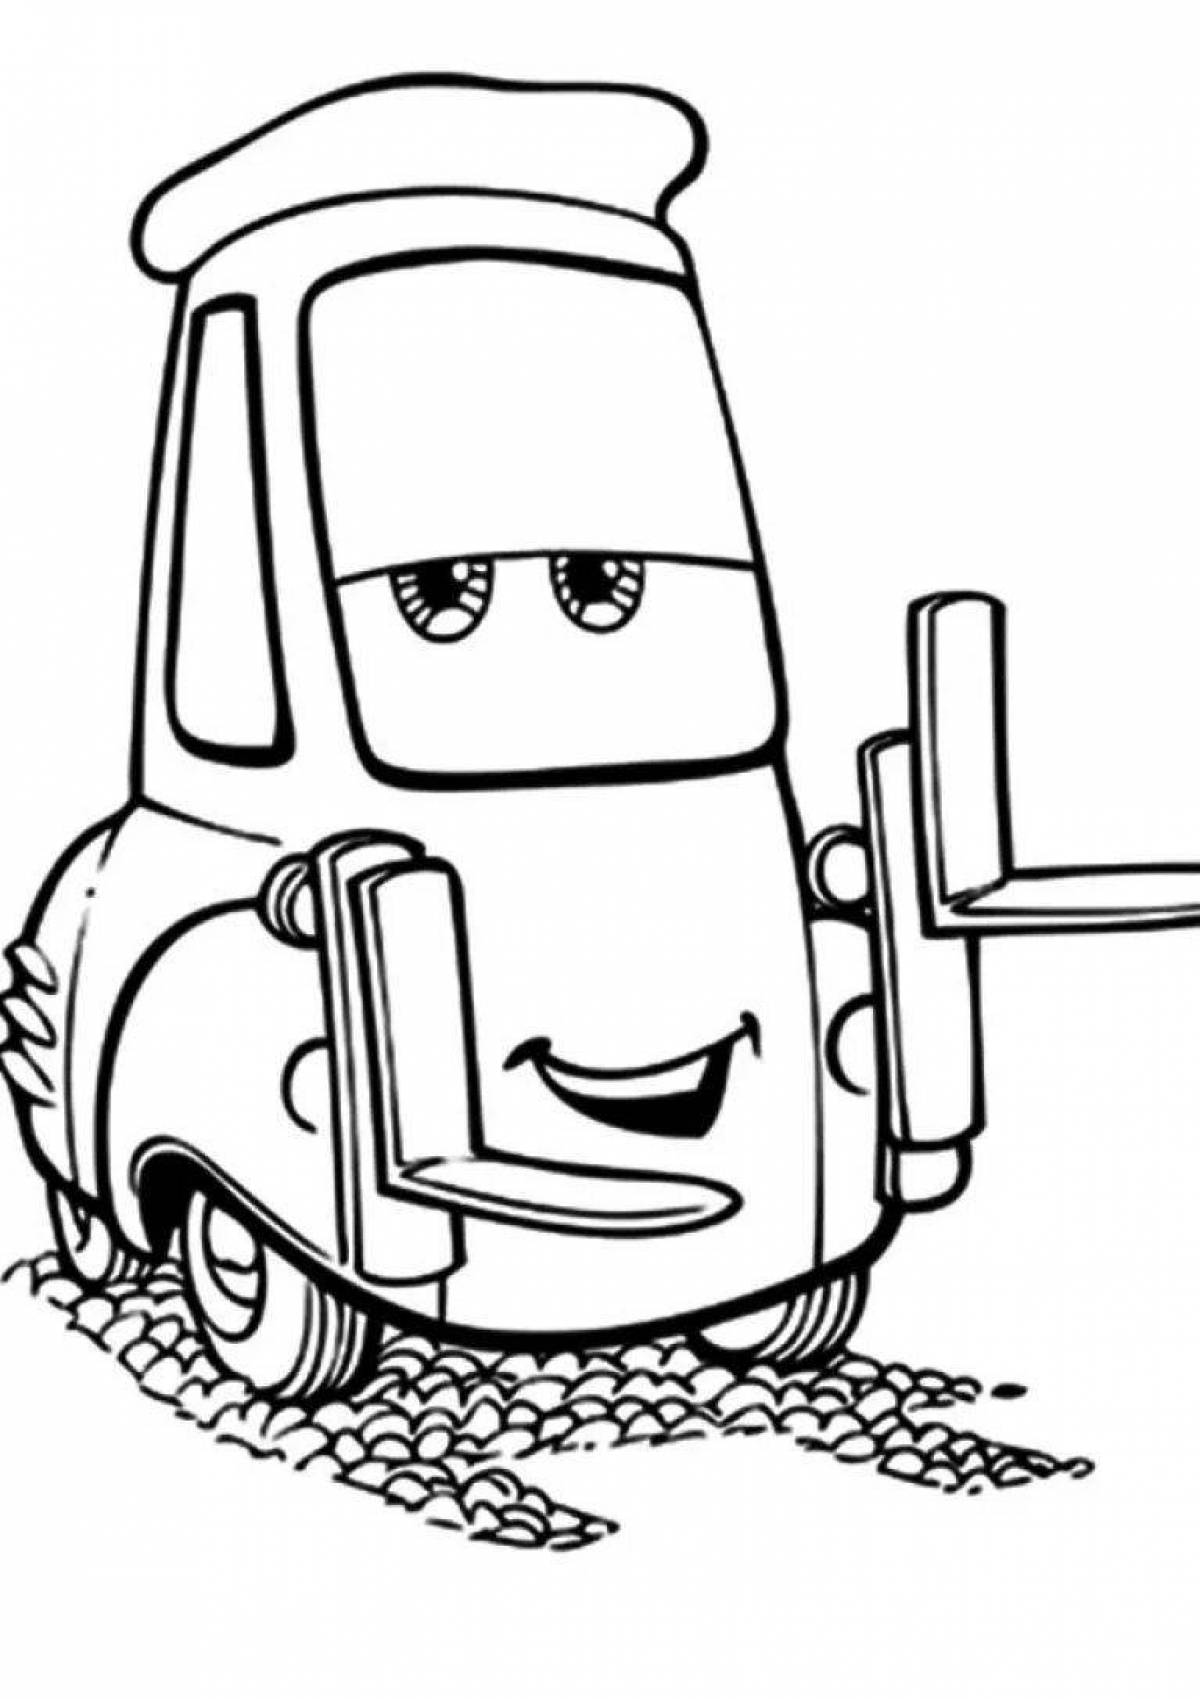 Fancy tow truck coloring book